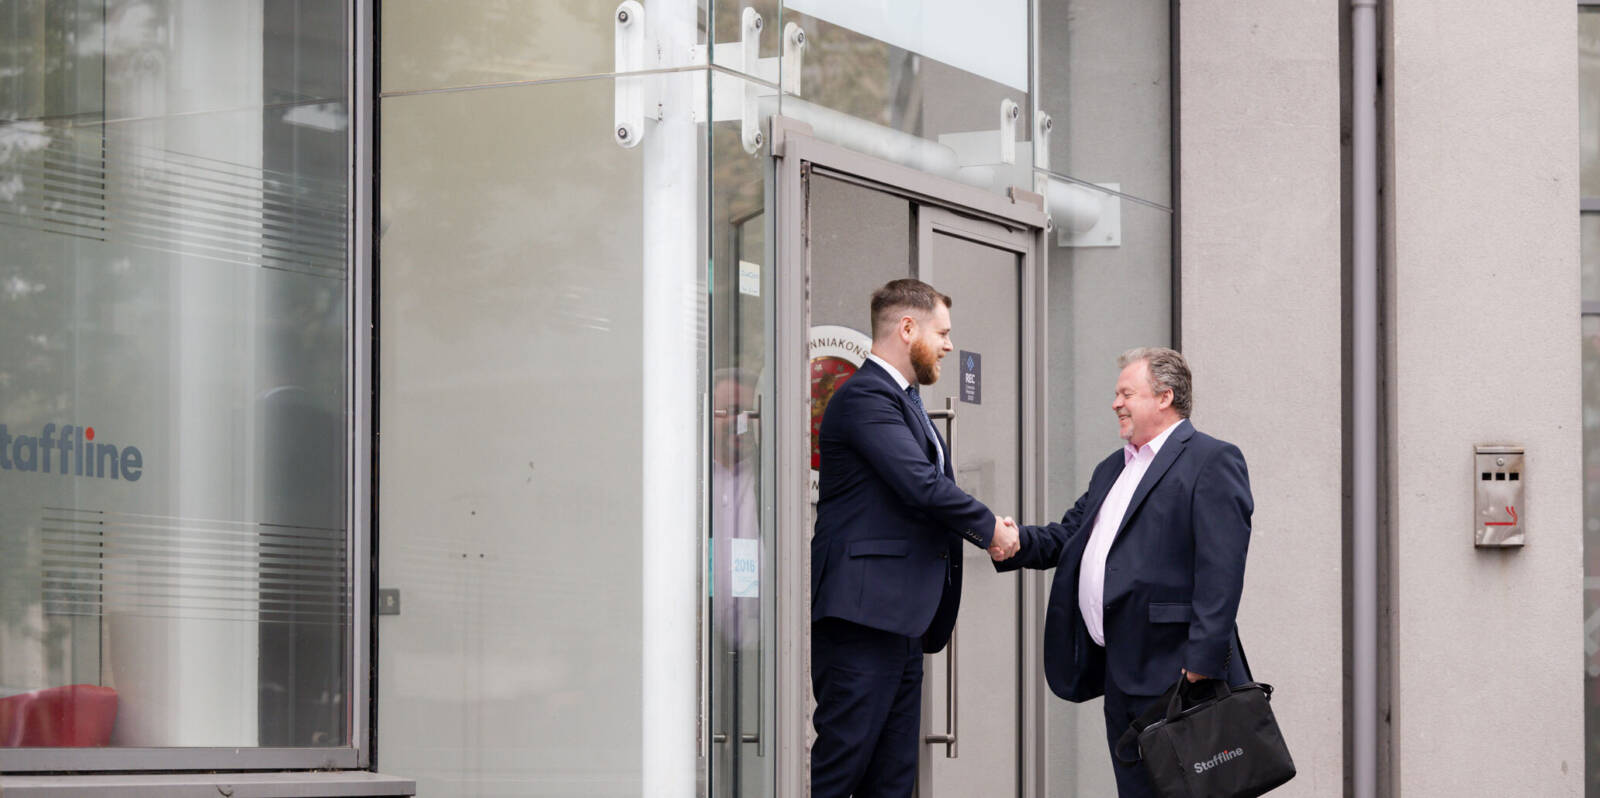 Two people greeting each other outside Staffline office